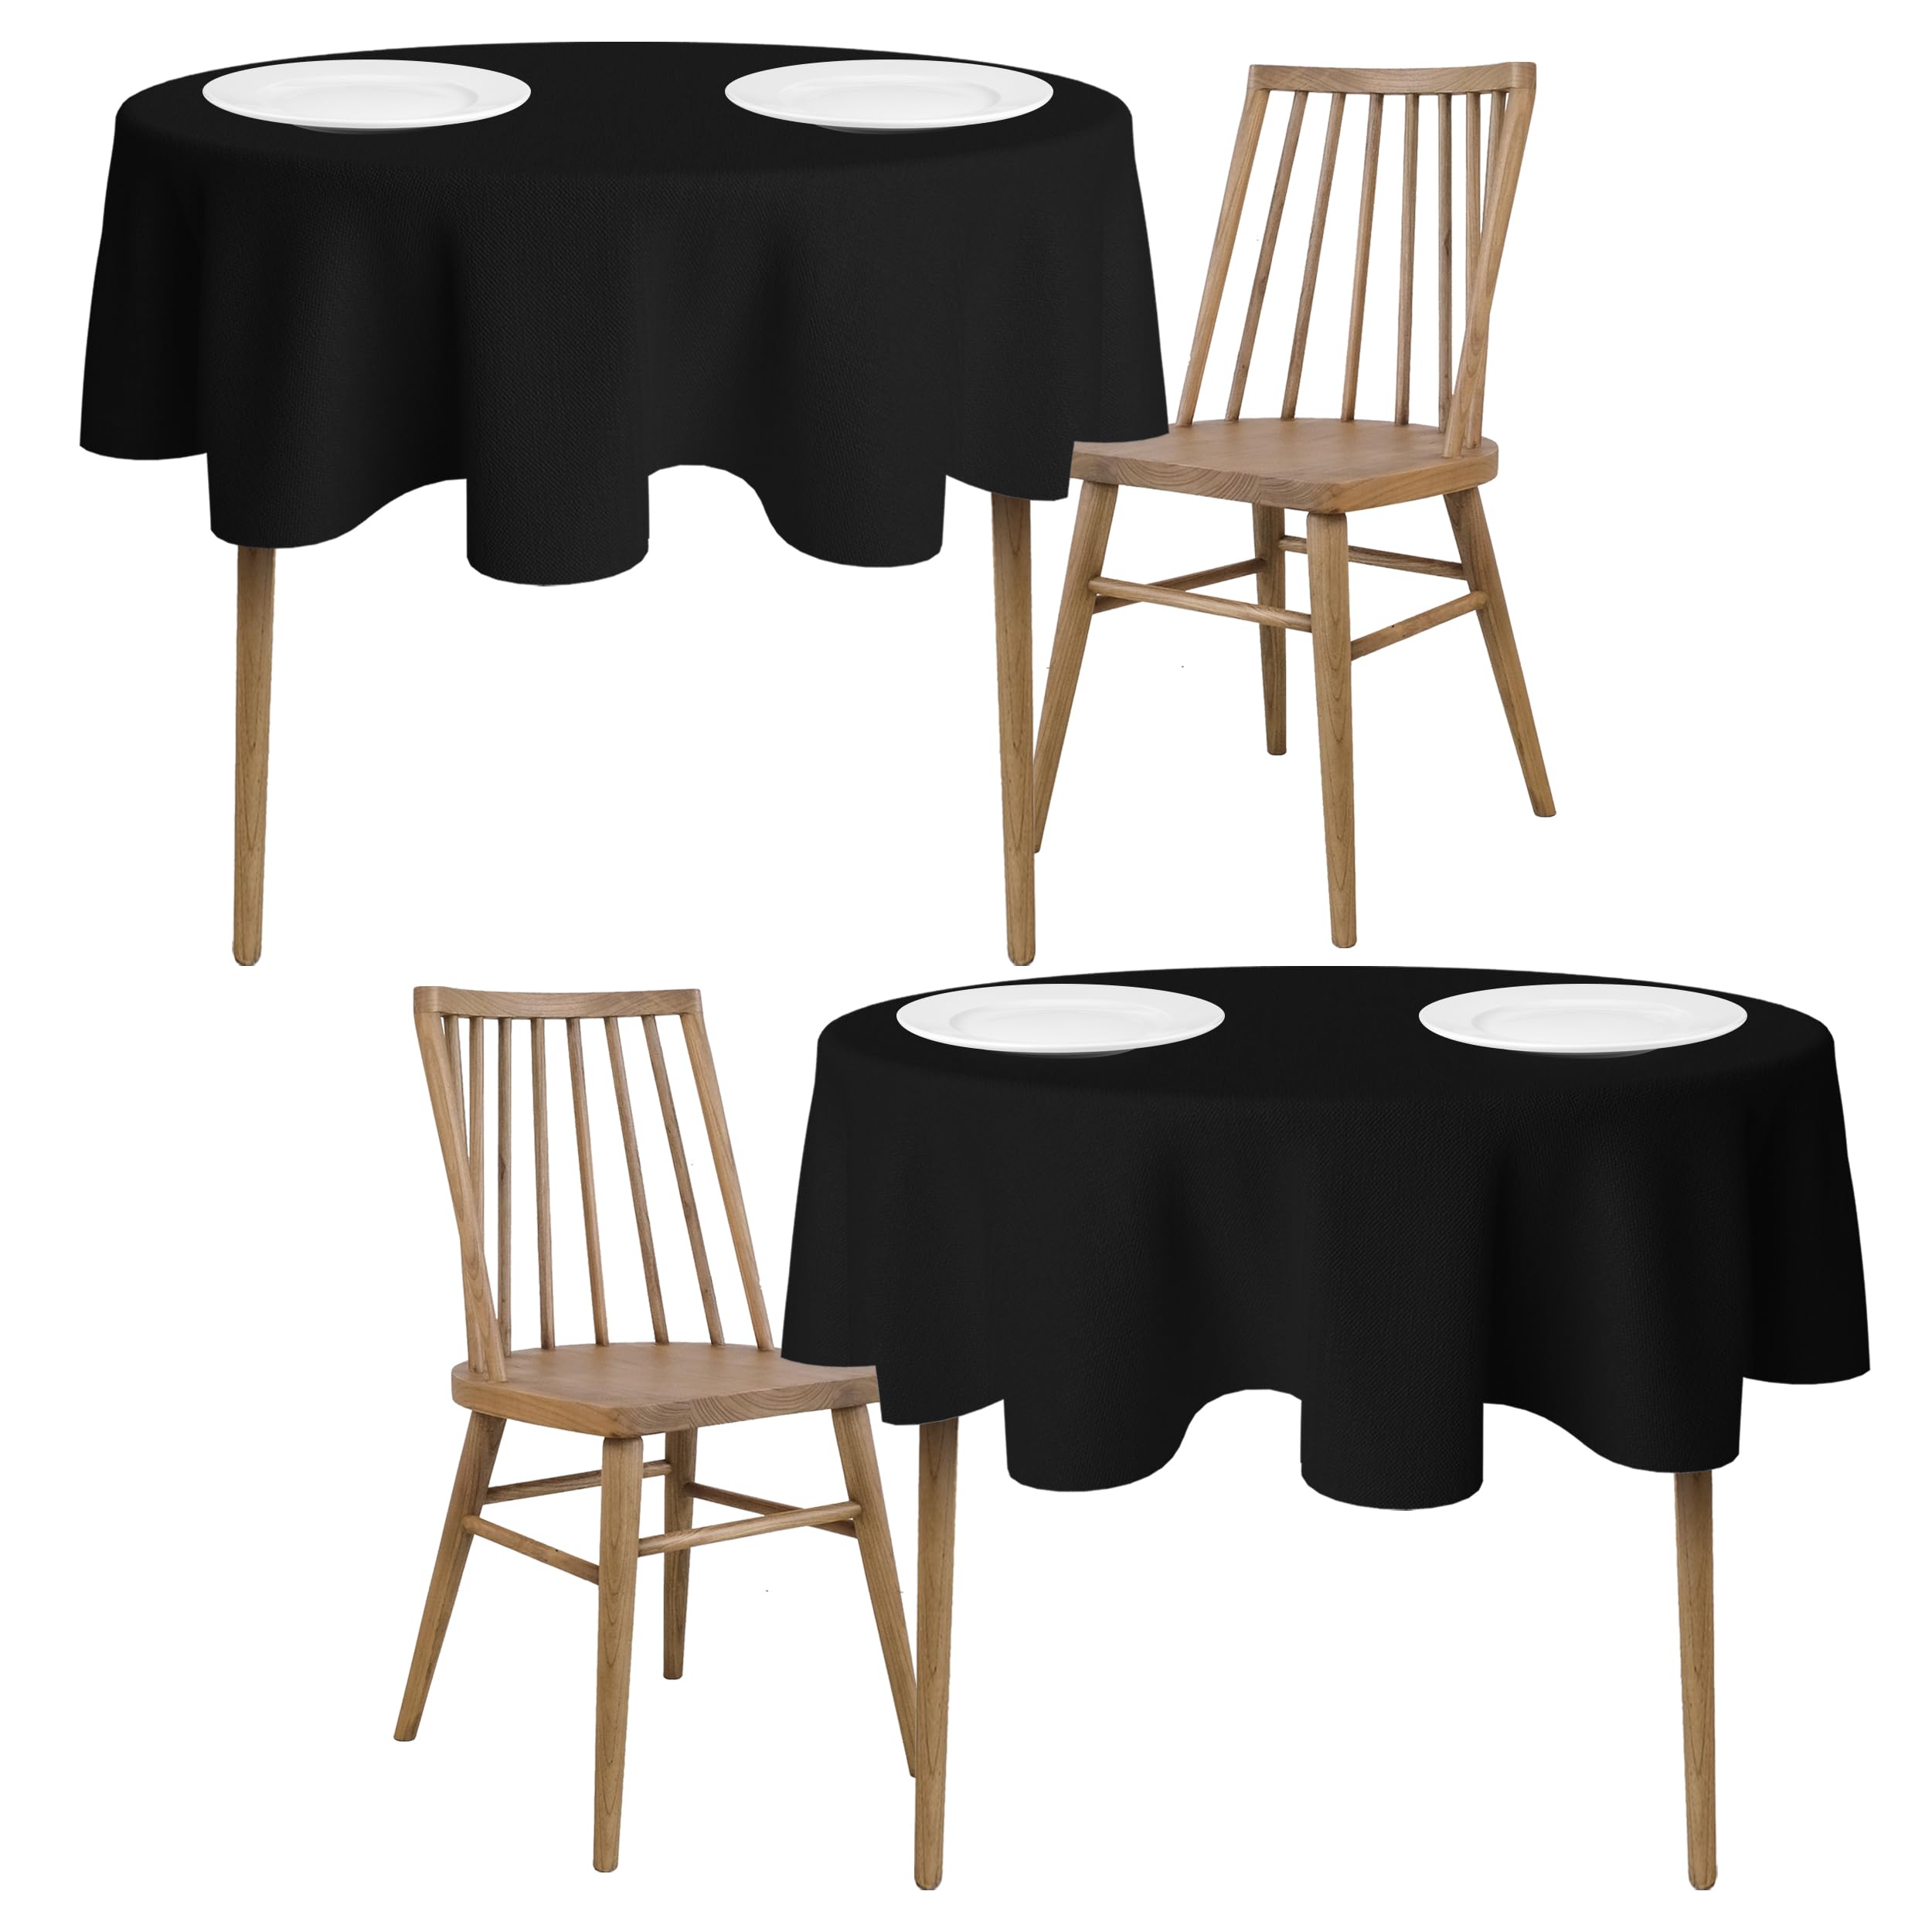 [2 Pack] 60" Round Premium Tablecloths for Wedding | Banquet | Restaurant | Washable Fabric Table Cloth  - Like New